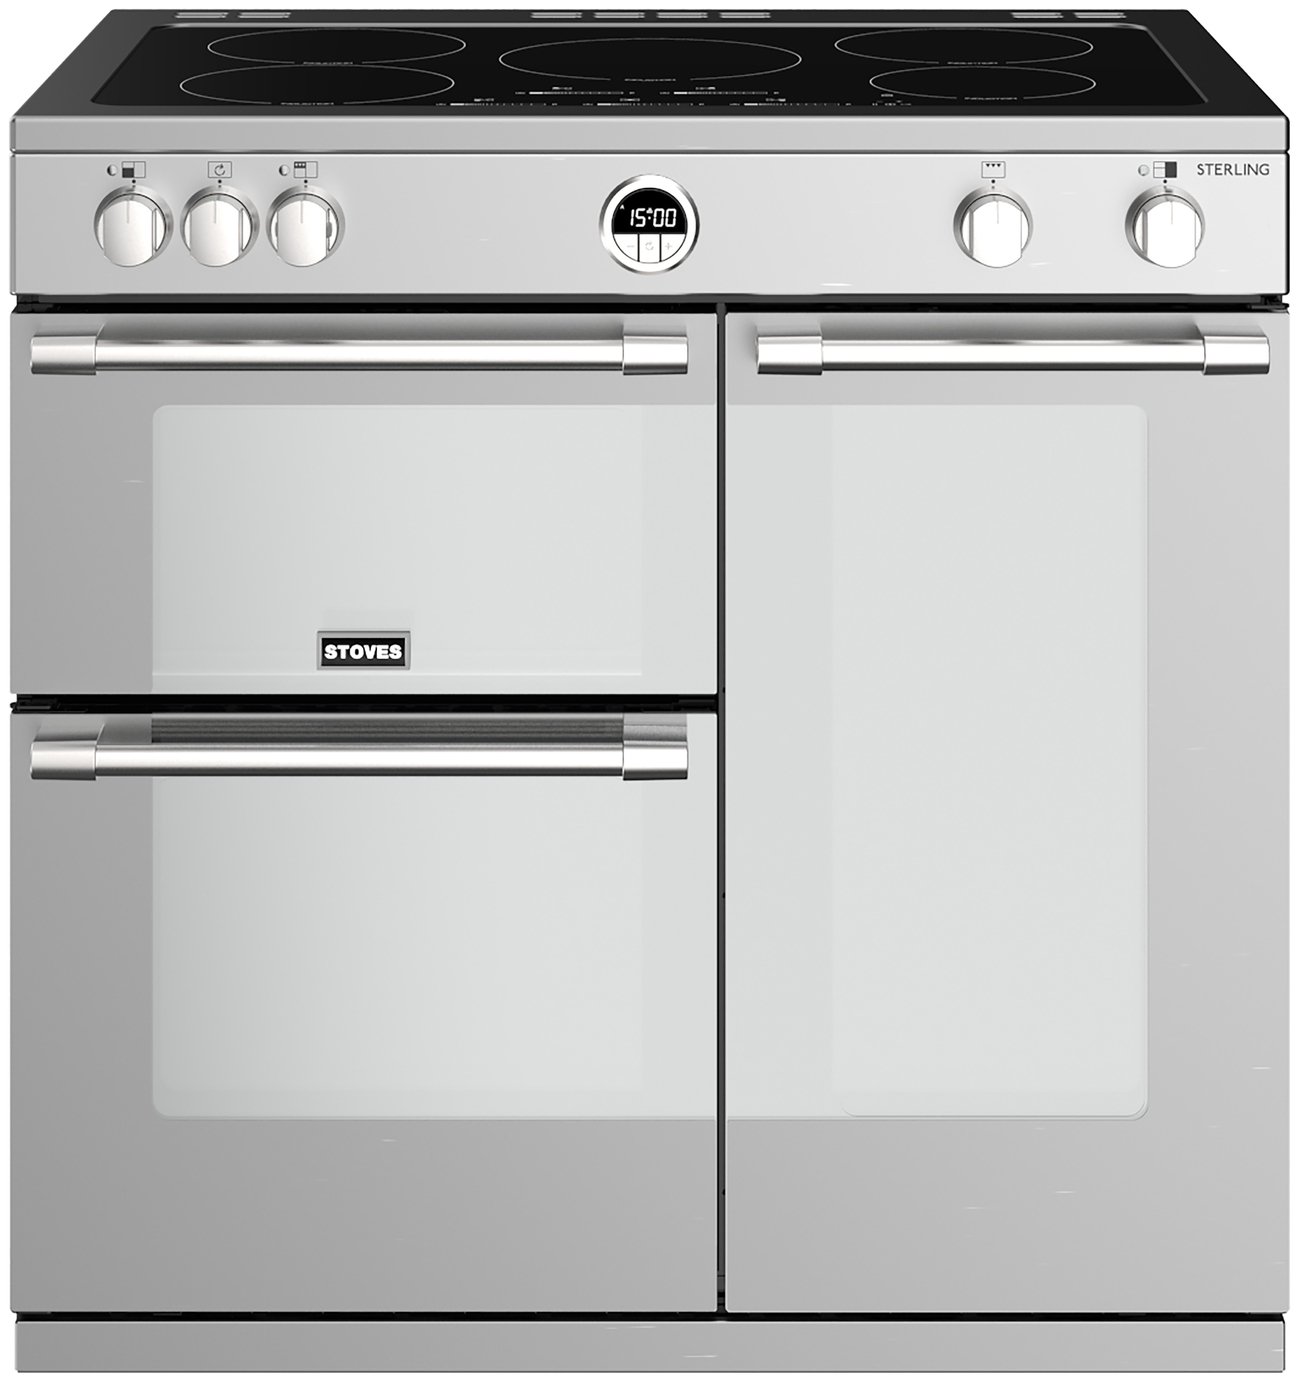 Stoves Sterling S900EI Electric Range Cooker review